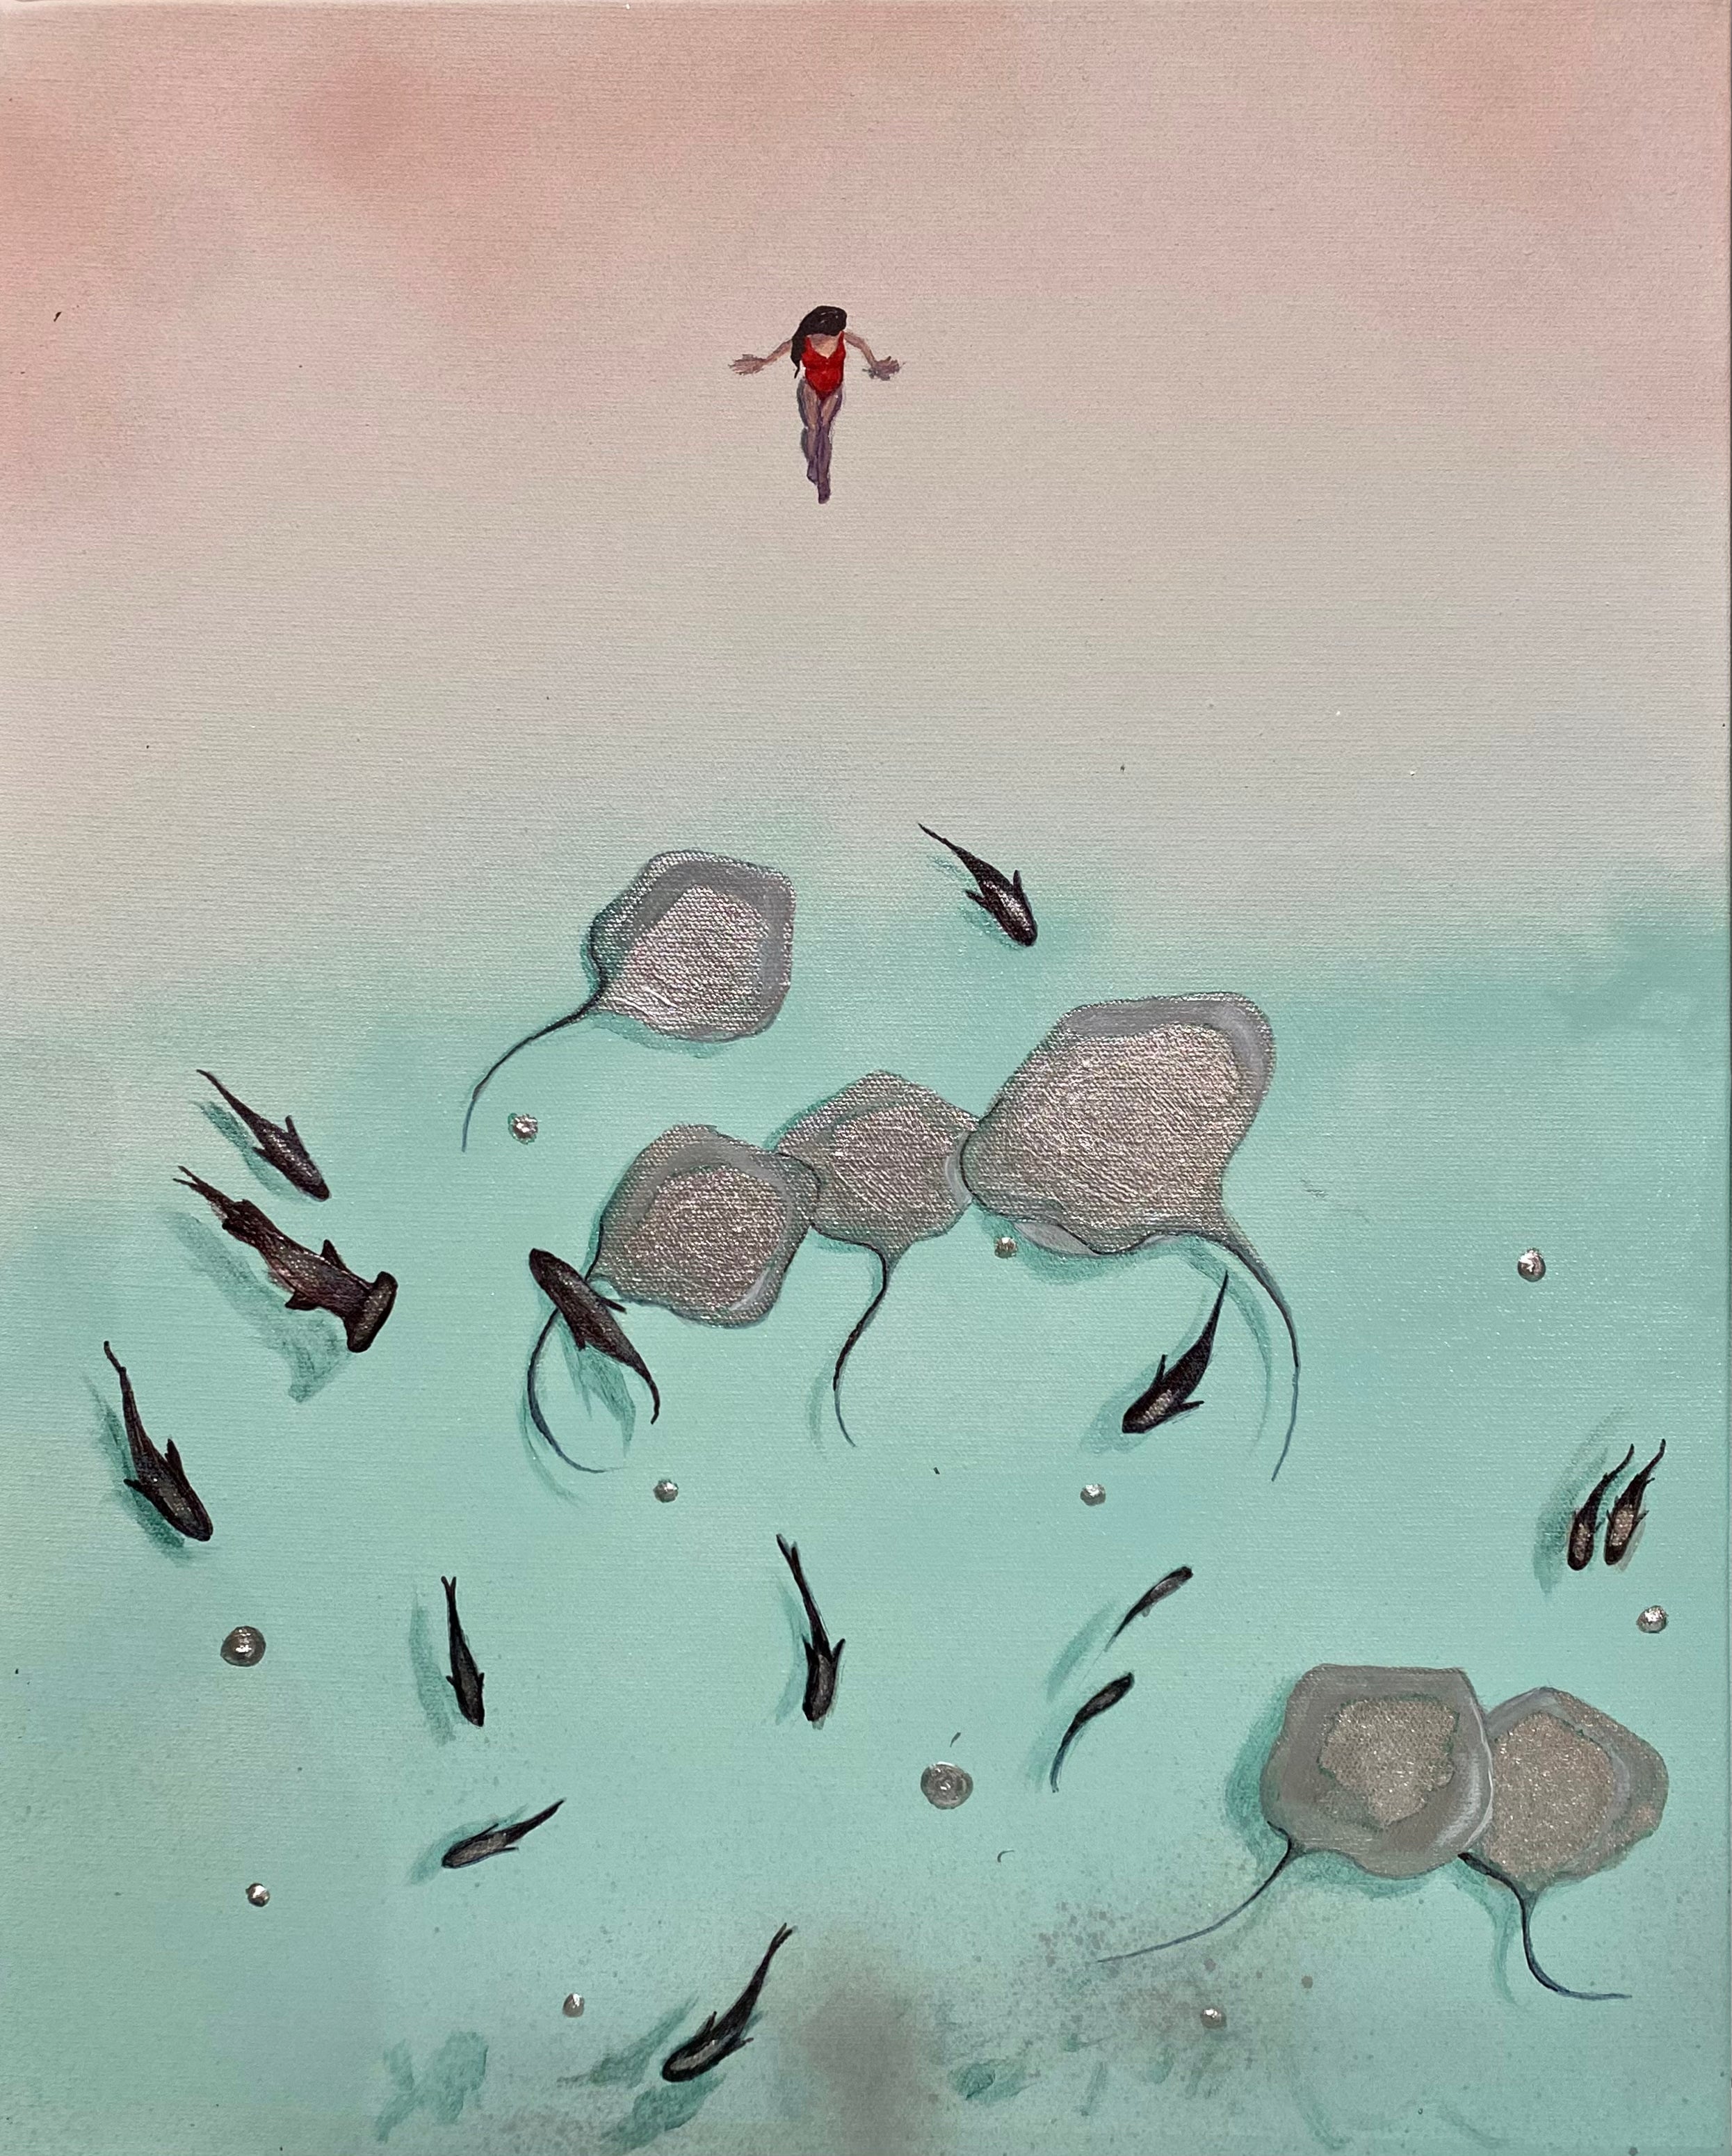 Someone is waiting for me 2 - Maldives - Sting rays - Ocean Mini Artwork - Xmas Gift